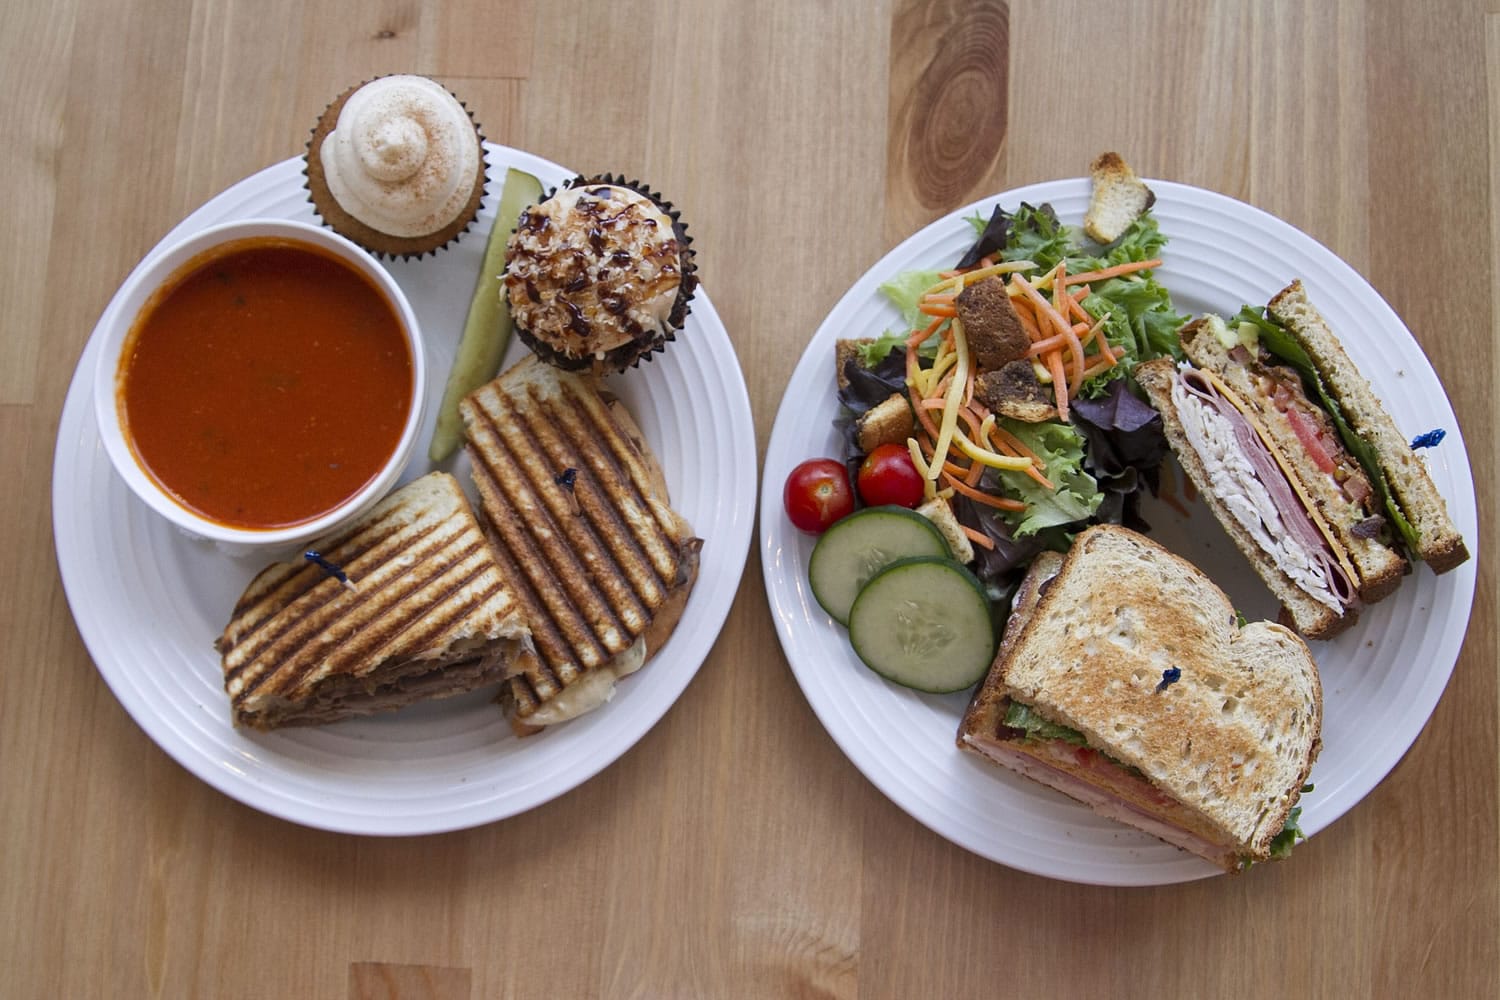 A roast beef panini, tomato basil soup and a Cafe House sandwich is served alongside chocolate coconut caramel and pumpkin pie cupcakes at the WildFlour Cafe and Cupcakes in Washougal.